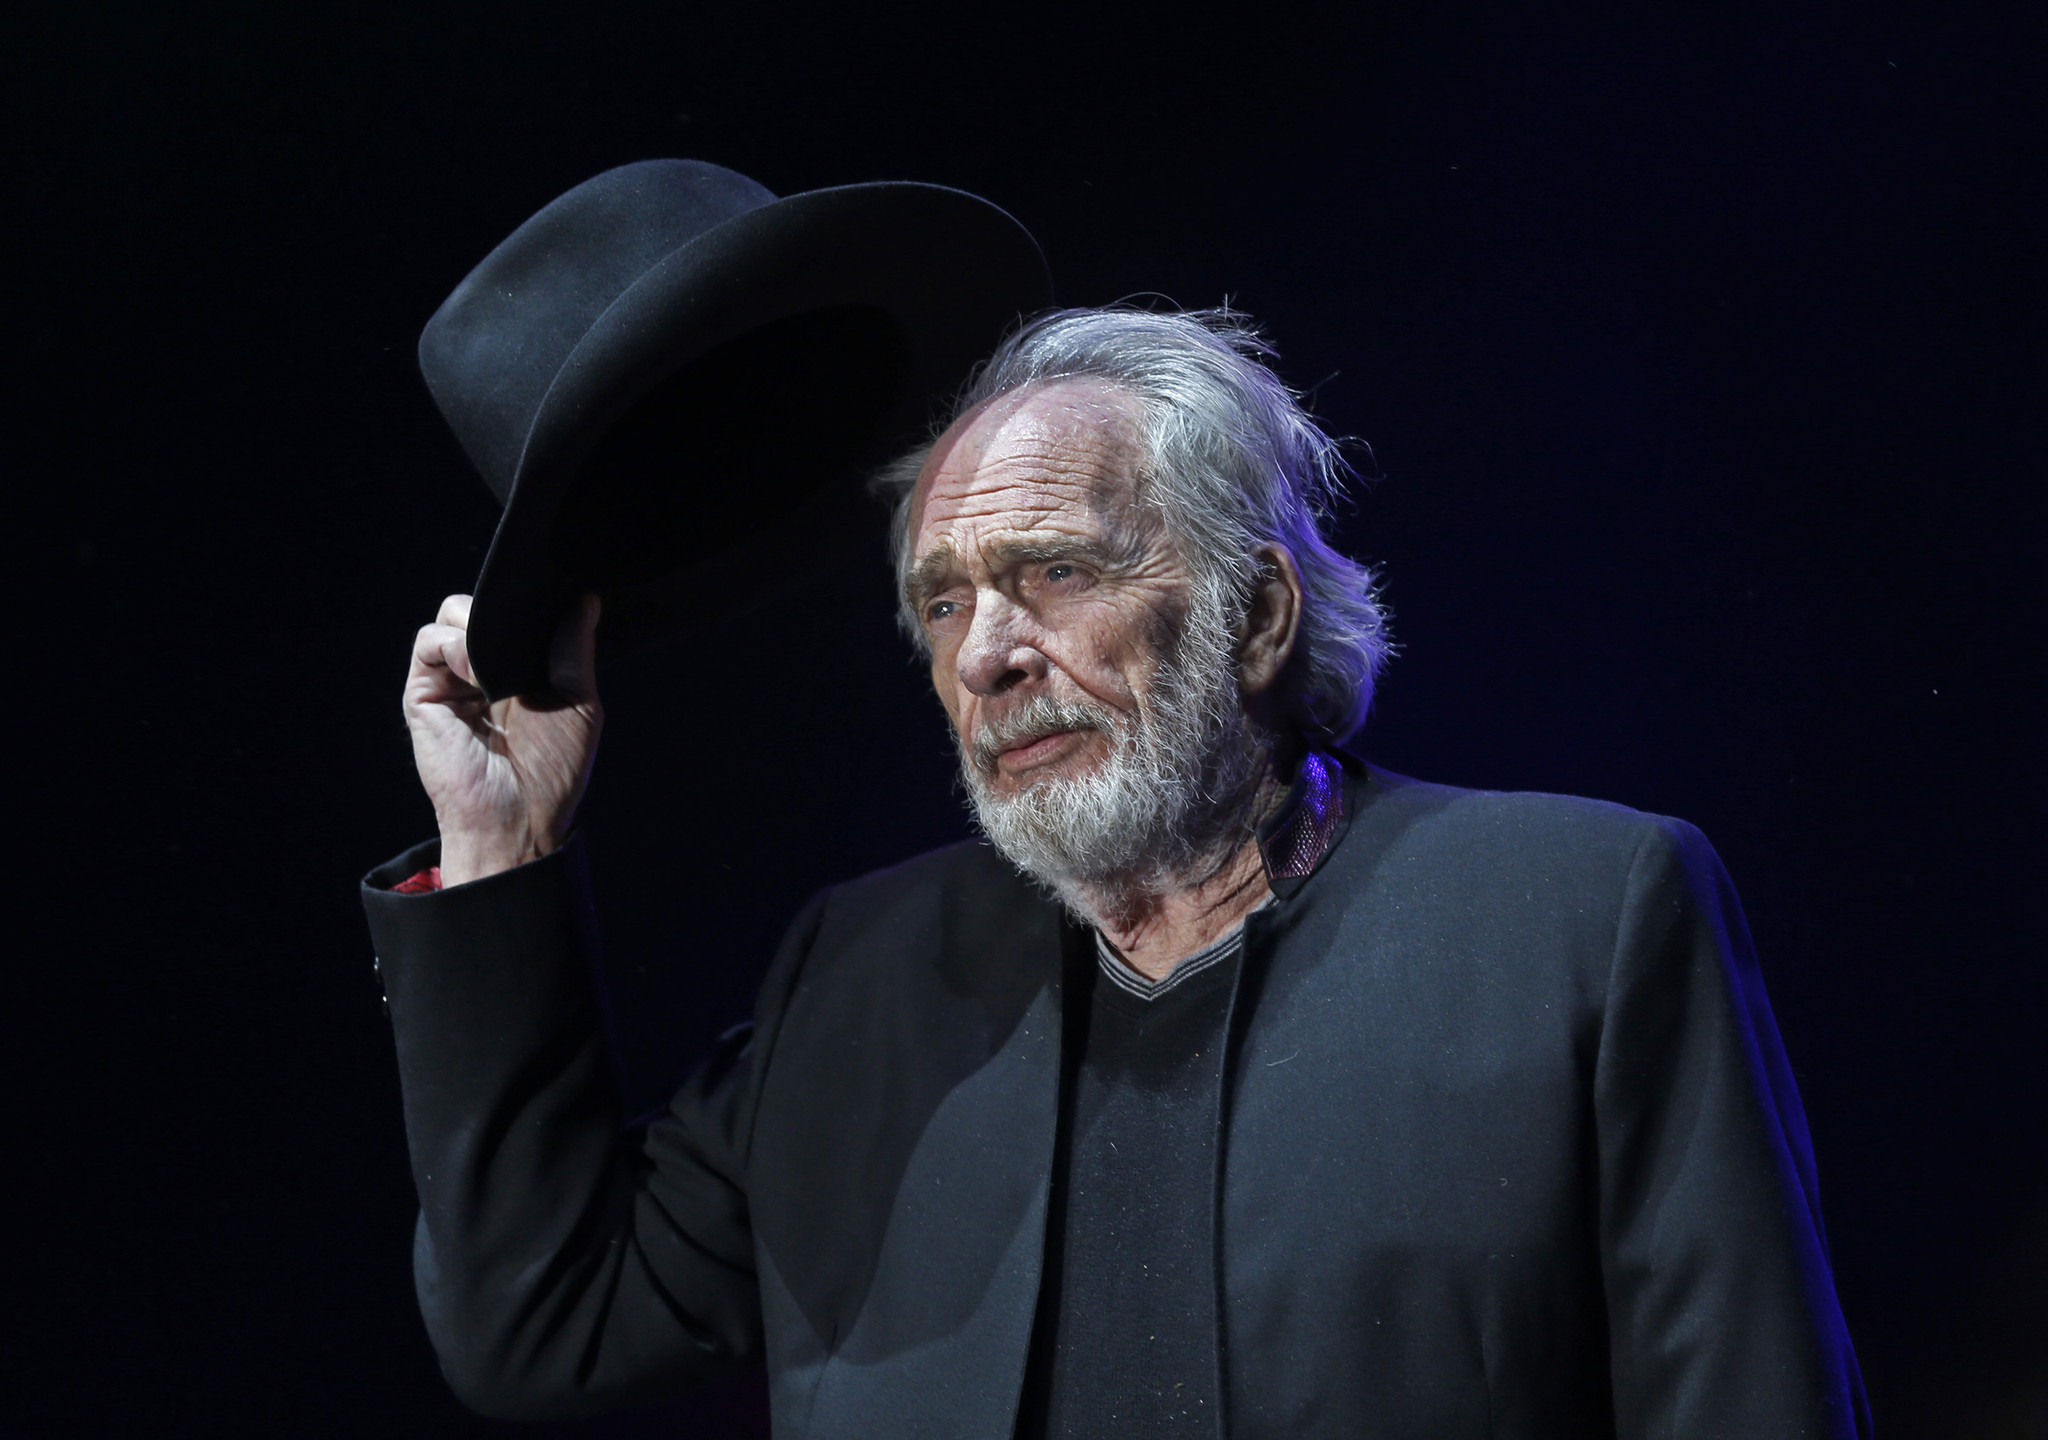 Where can you find Merle Haggard's obituary?